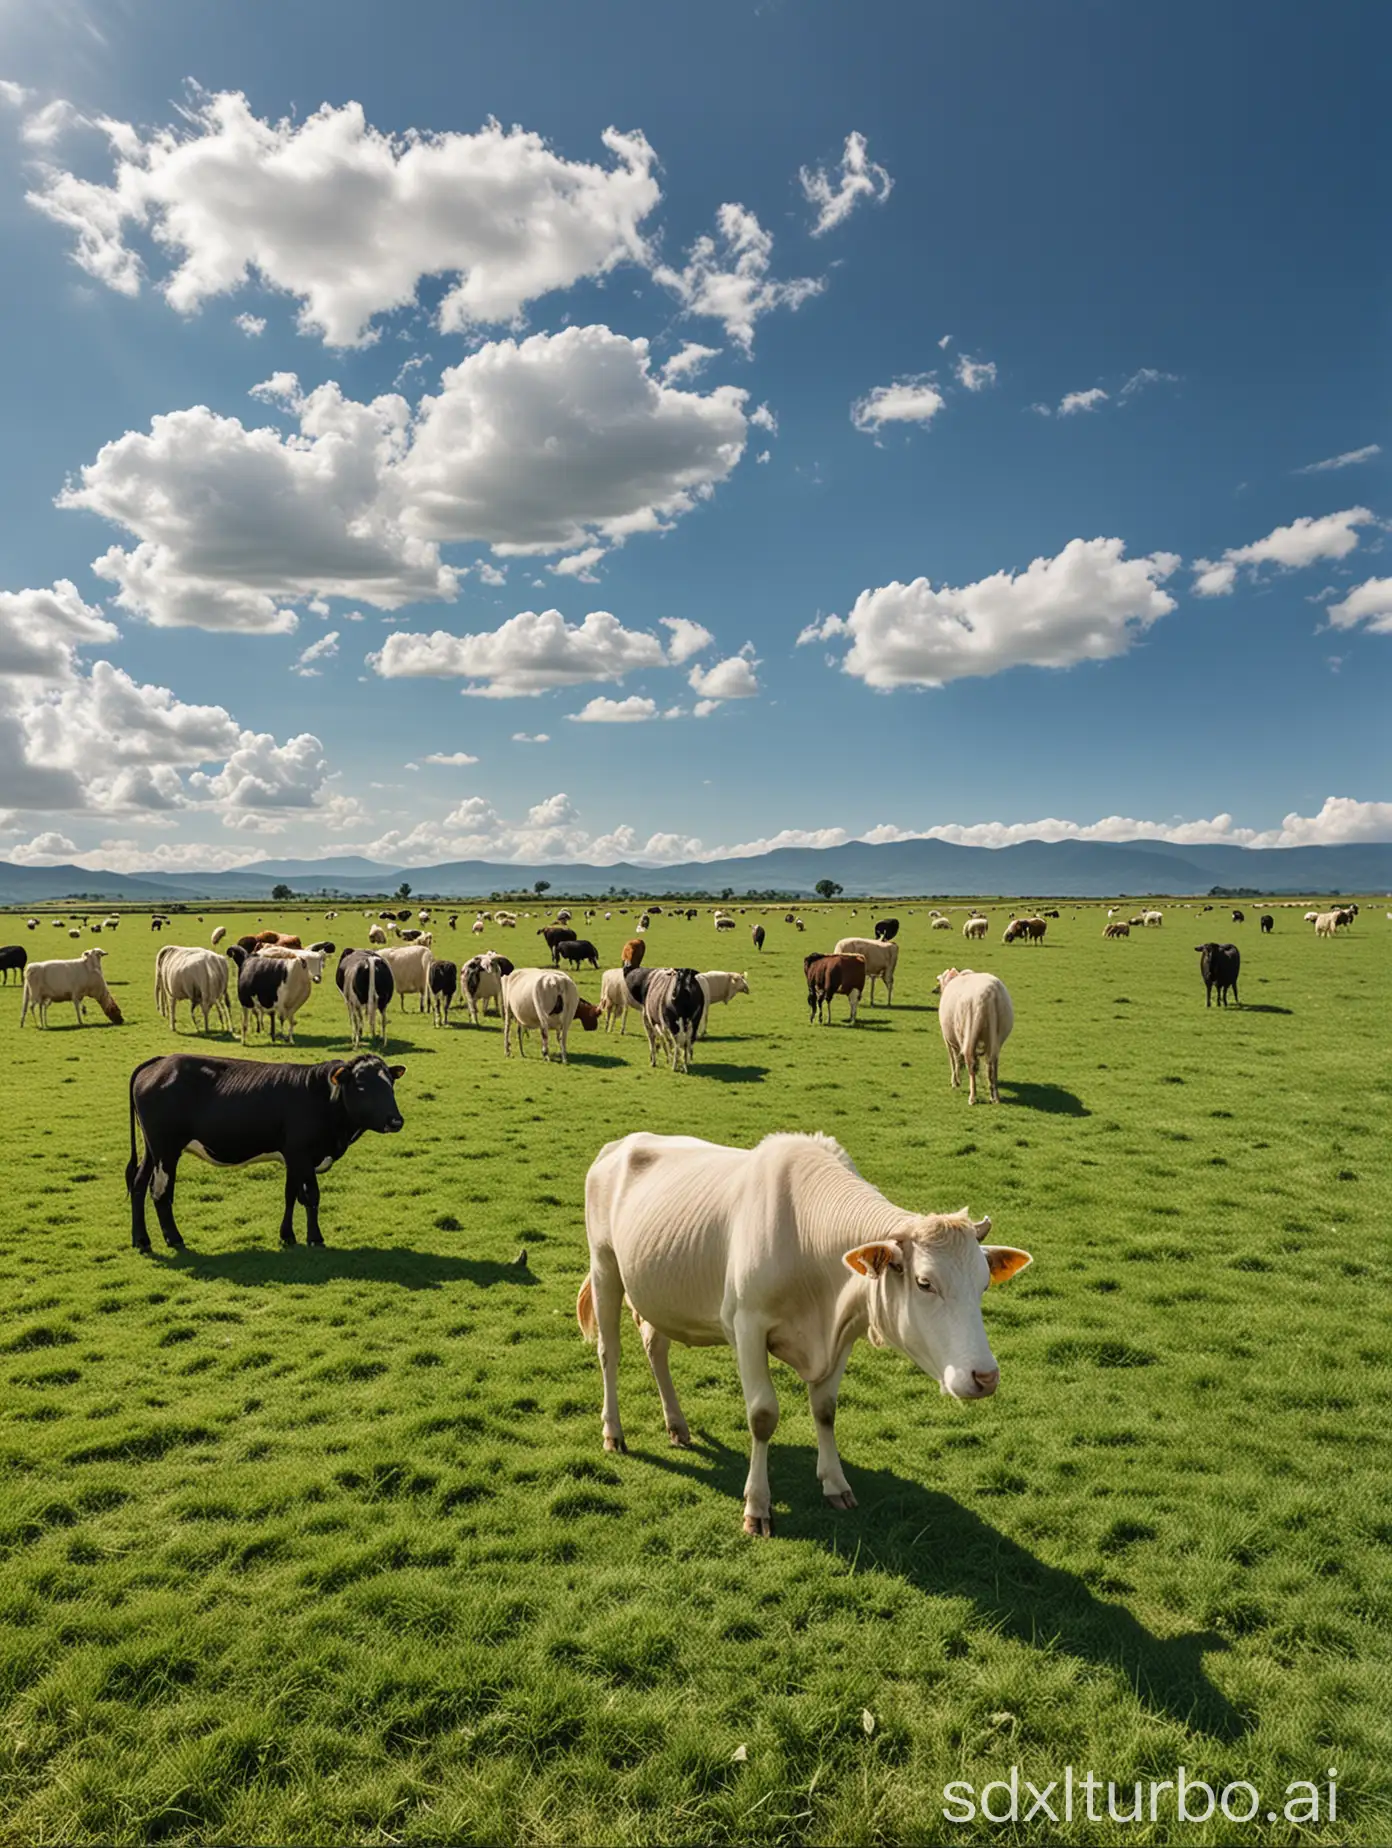 The main subjects are cows, sheep, and chickens on the grassland, under the blue sky.